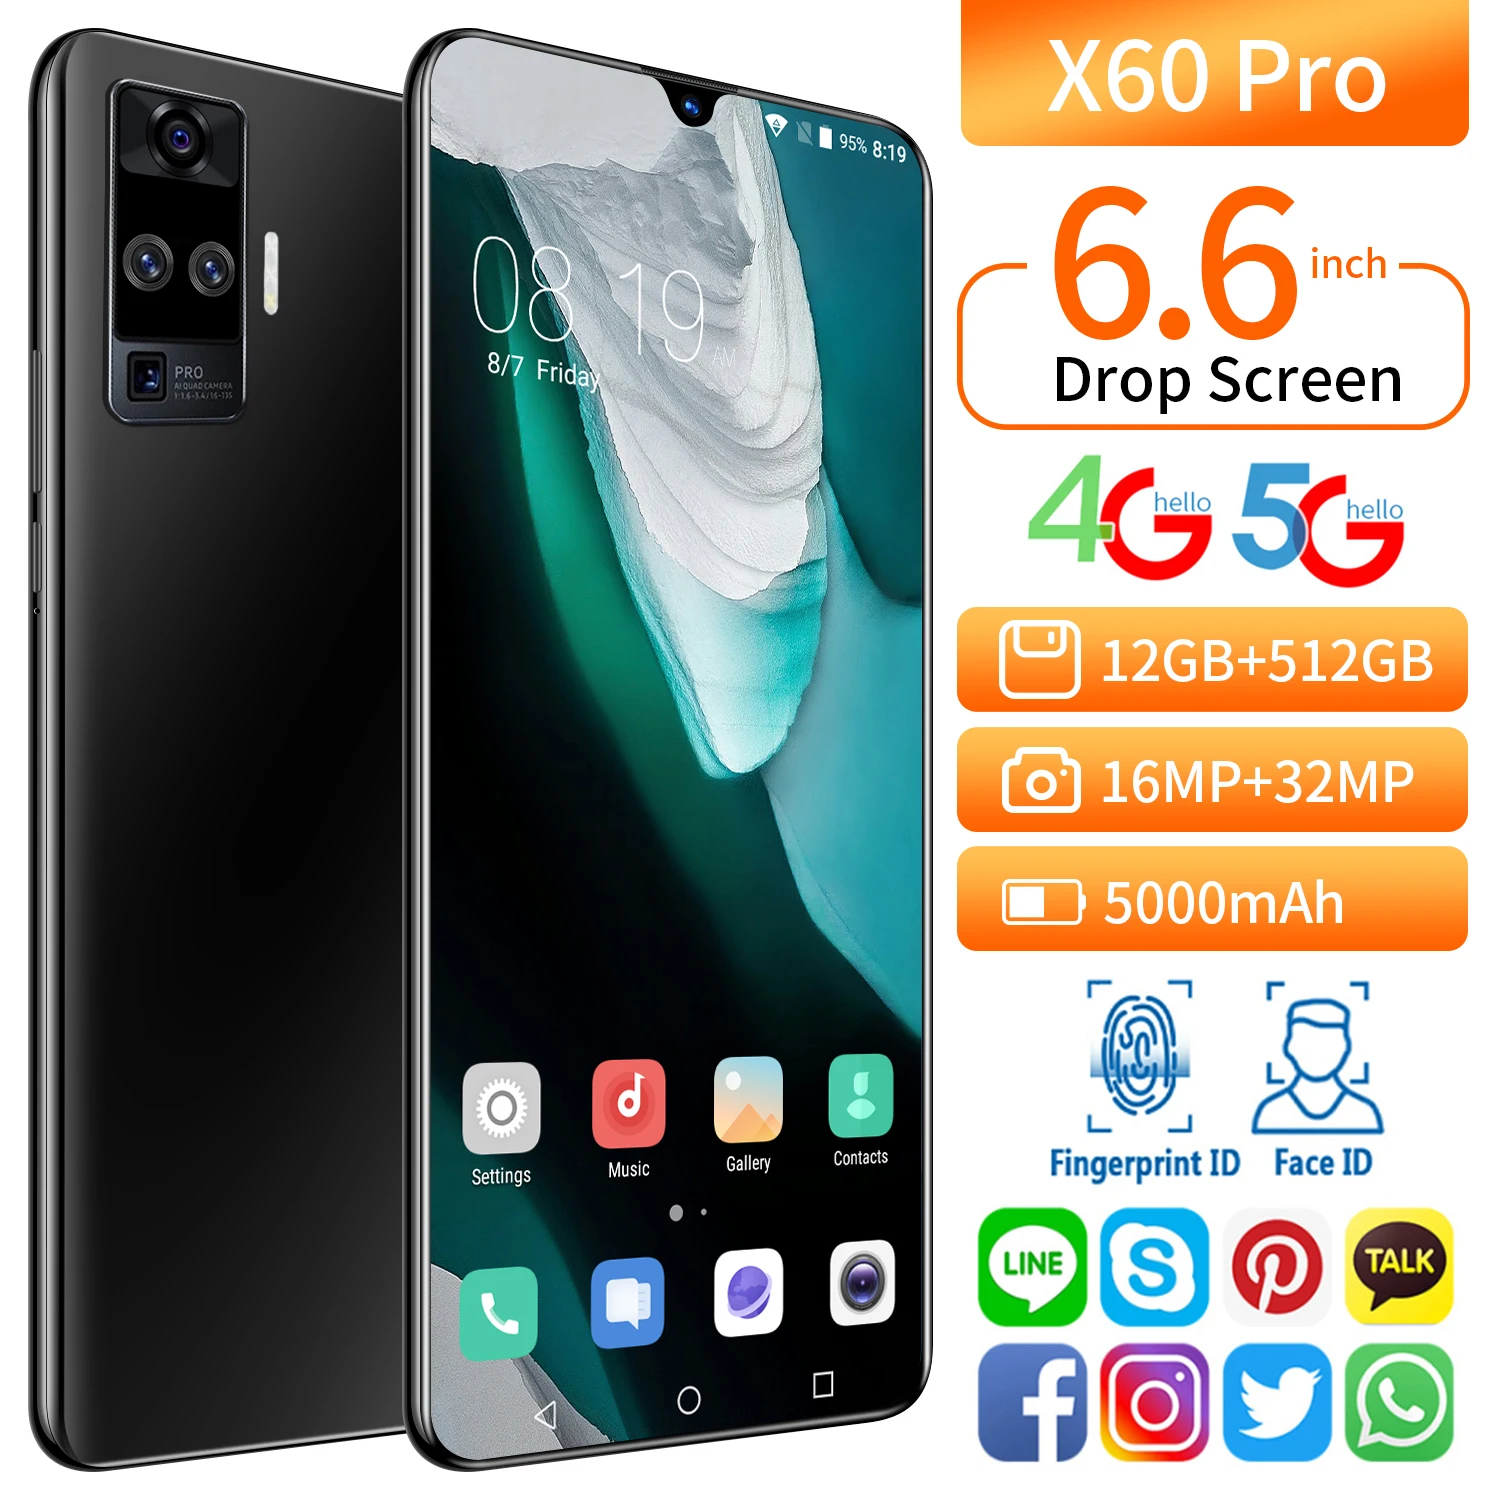 

Global Version X60 Pro 6.6" Smartphone Snapdragon 865 Quad Camera 32MP 12GB+512GB 5000mAh Android 10.0 5G LTE Cell Mobile Phone